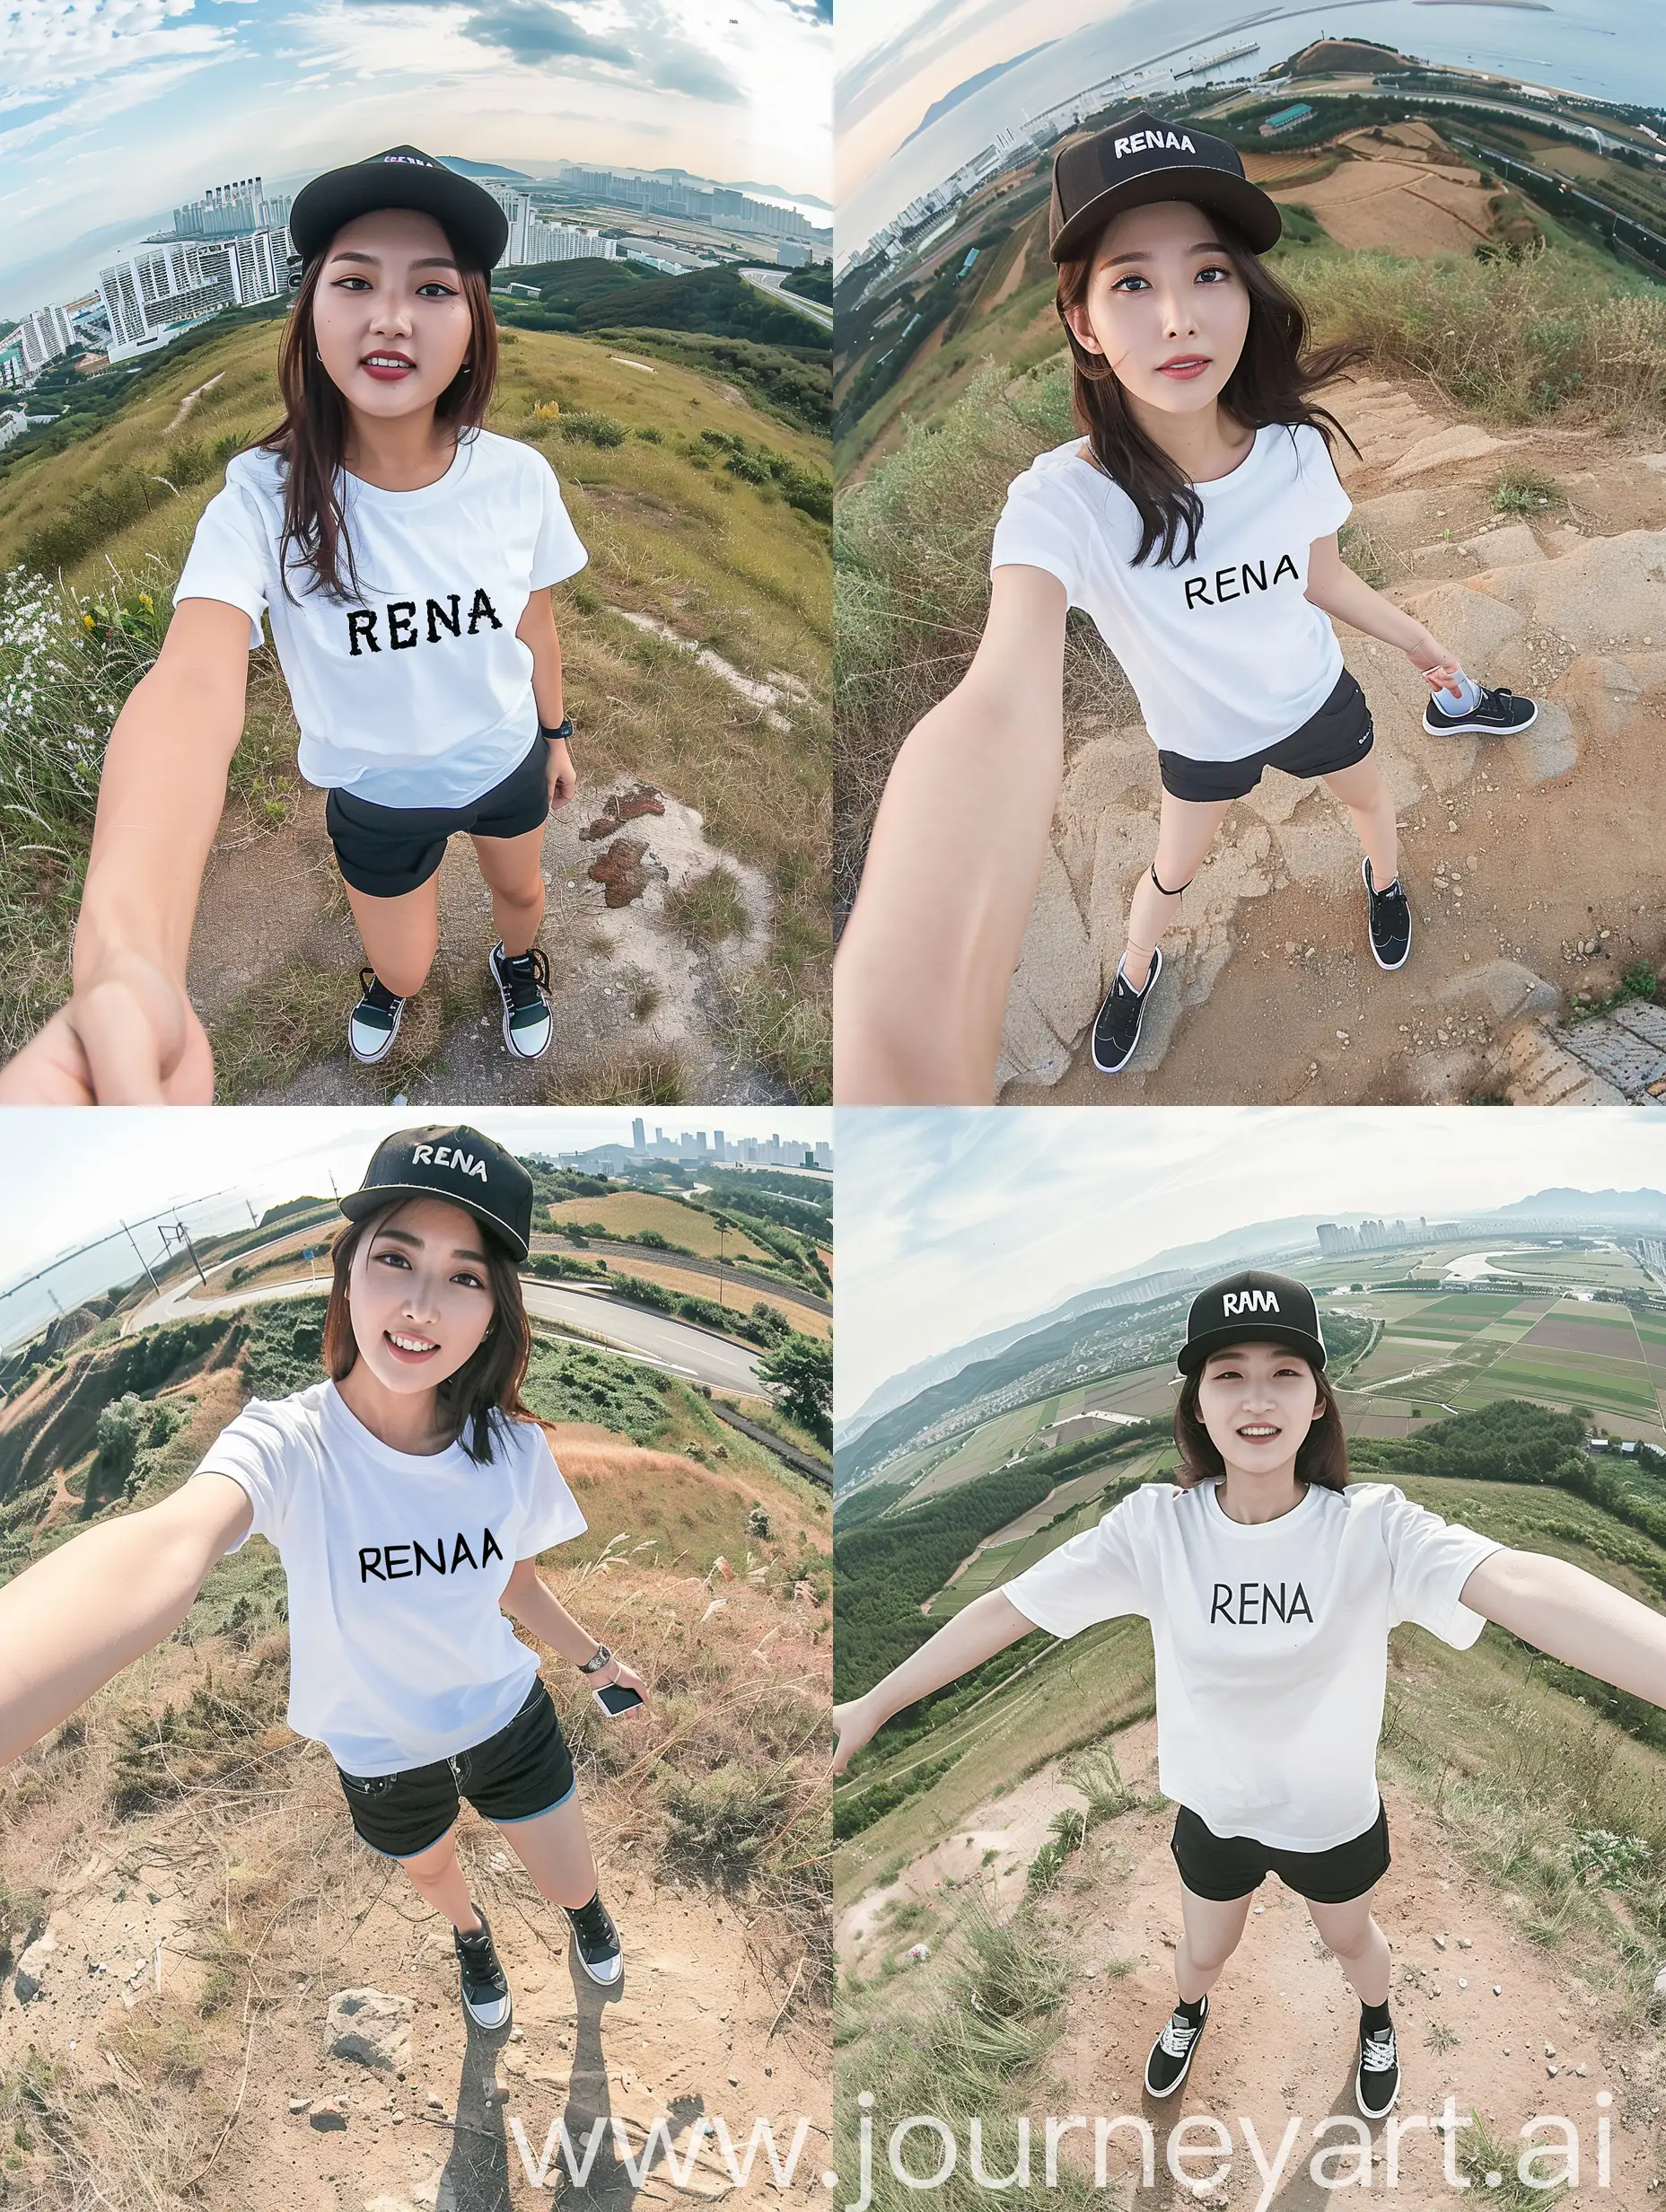 a 25 year old native Korean woman wearing a white t-shirt with the name "RENA" written on it. black sneakers, shorts, snap back hat, selfie on top of the hill, background at the top of the hill, and view from above, fish eye camera shots, the best professional photographer images, everything looks very realistic and amazing